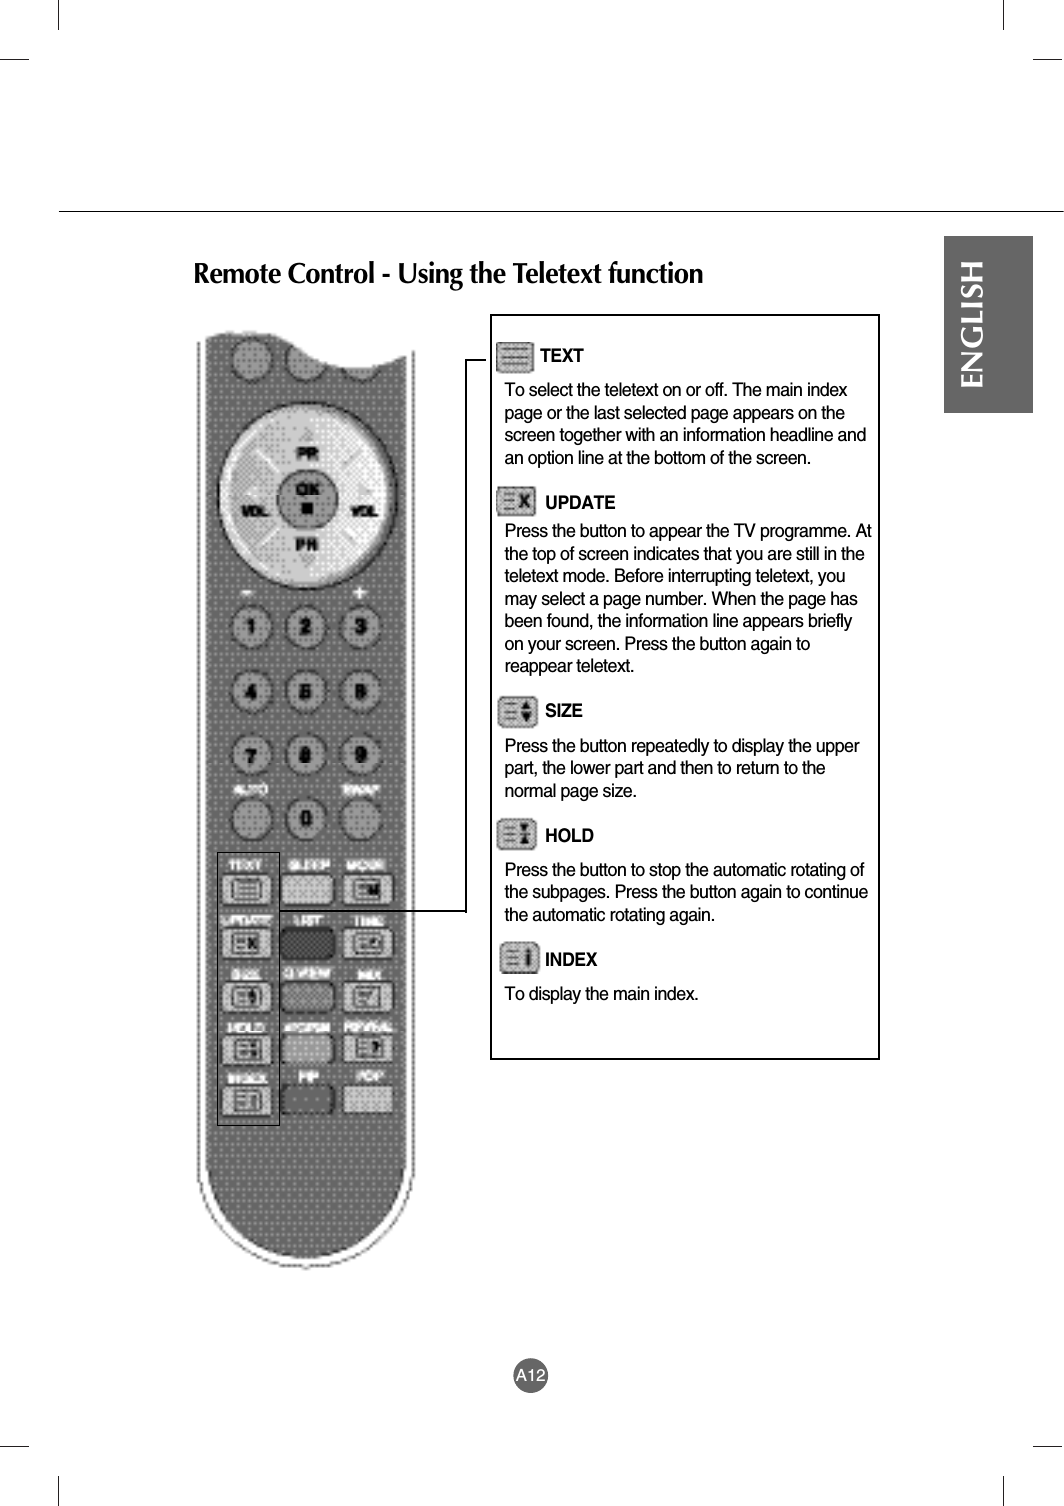 A12ENGLISHRemote Control - Using the Teletext functionTEXTTo select the teletext on or off. The main indexpage or the last selected page appears on thescreen together with an information headline andan option line at the bottom of the screen.UPDATEPress the button to appear the TV programme. Atthe top of screen indicates that you are still in theteletext mode. Before interrupting teletext, youmay select a page number. When the page hasbeen found, the information line appears brieflyon your screen. Press the button again toreappear teletext.SIZEPress the button repeatedly to display the upperpart, the lower part and then to return to thenormal page size. HOLDPress the button to stop the automatic rotating ofthe subpages. Press the button again to continuethe automatic rotating again.INDEXTo display the main index.